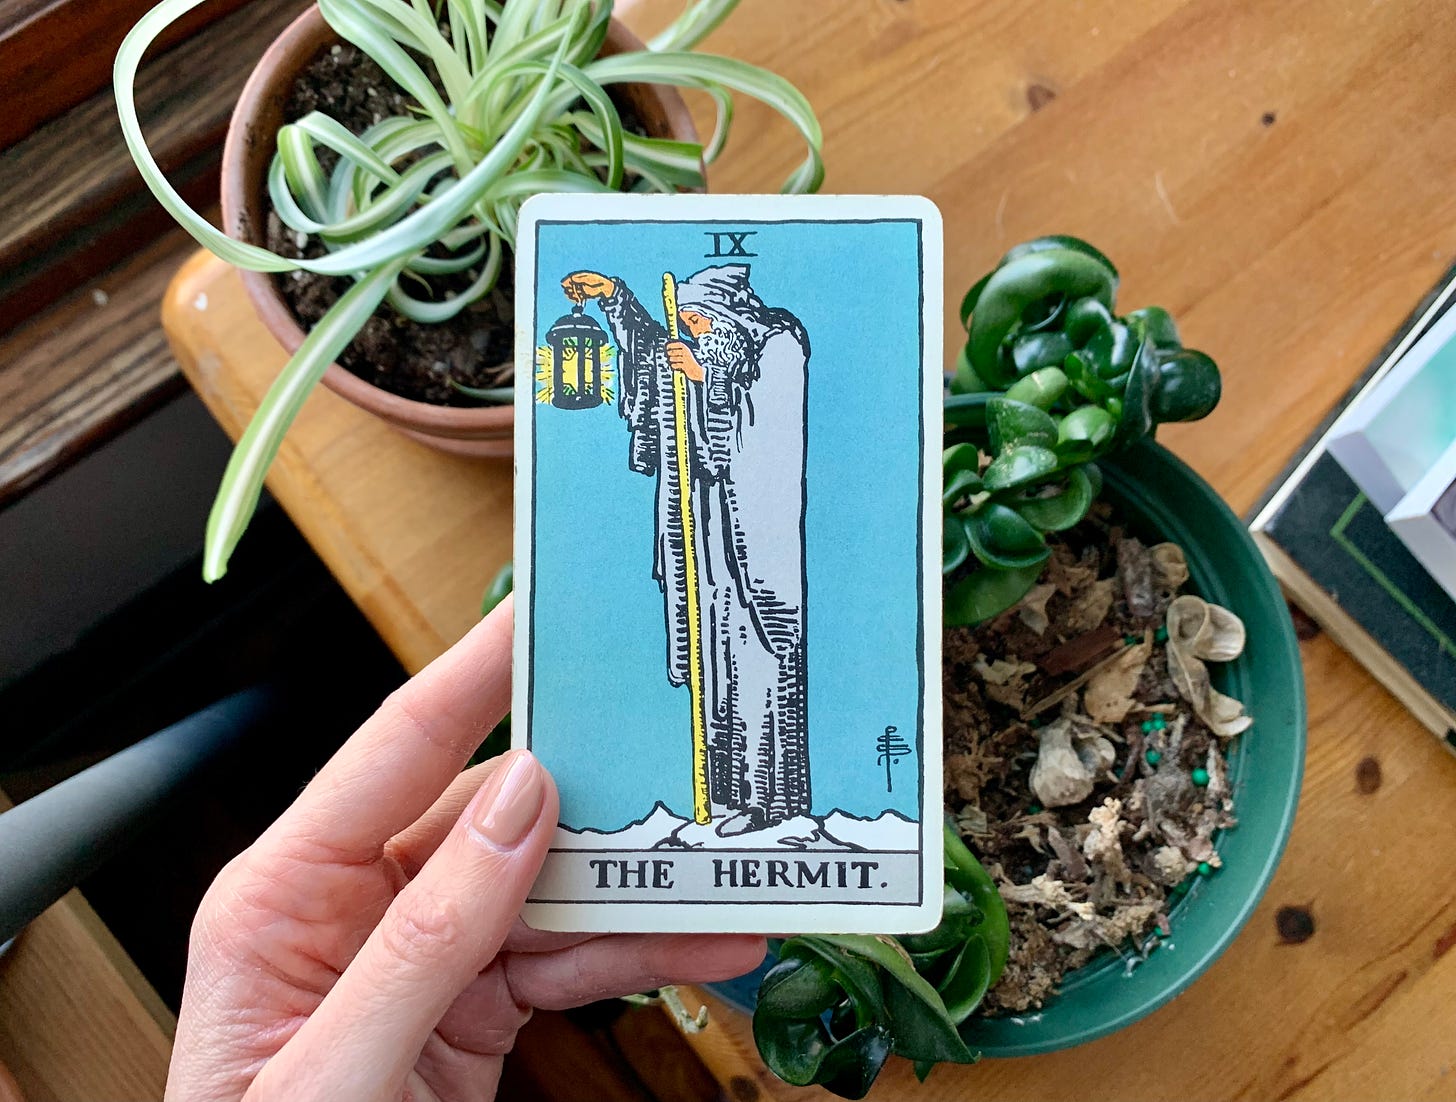 A hand is holding a tarot card, the hermit by pamela colman smith. In the image, a person is standing cloaked in all gray with a white beard and hood. They're holding a lamp with a star in it, and a staff. They're standing on the top of a snow capped mountain inside a mountain range. The background of the card is teal. Behind the card are some houseplants on a wooden table next to a window sill.